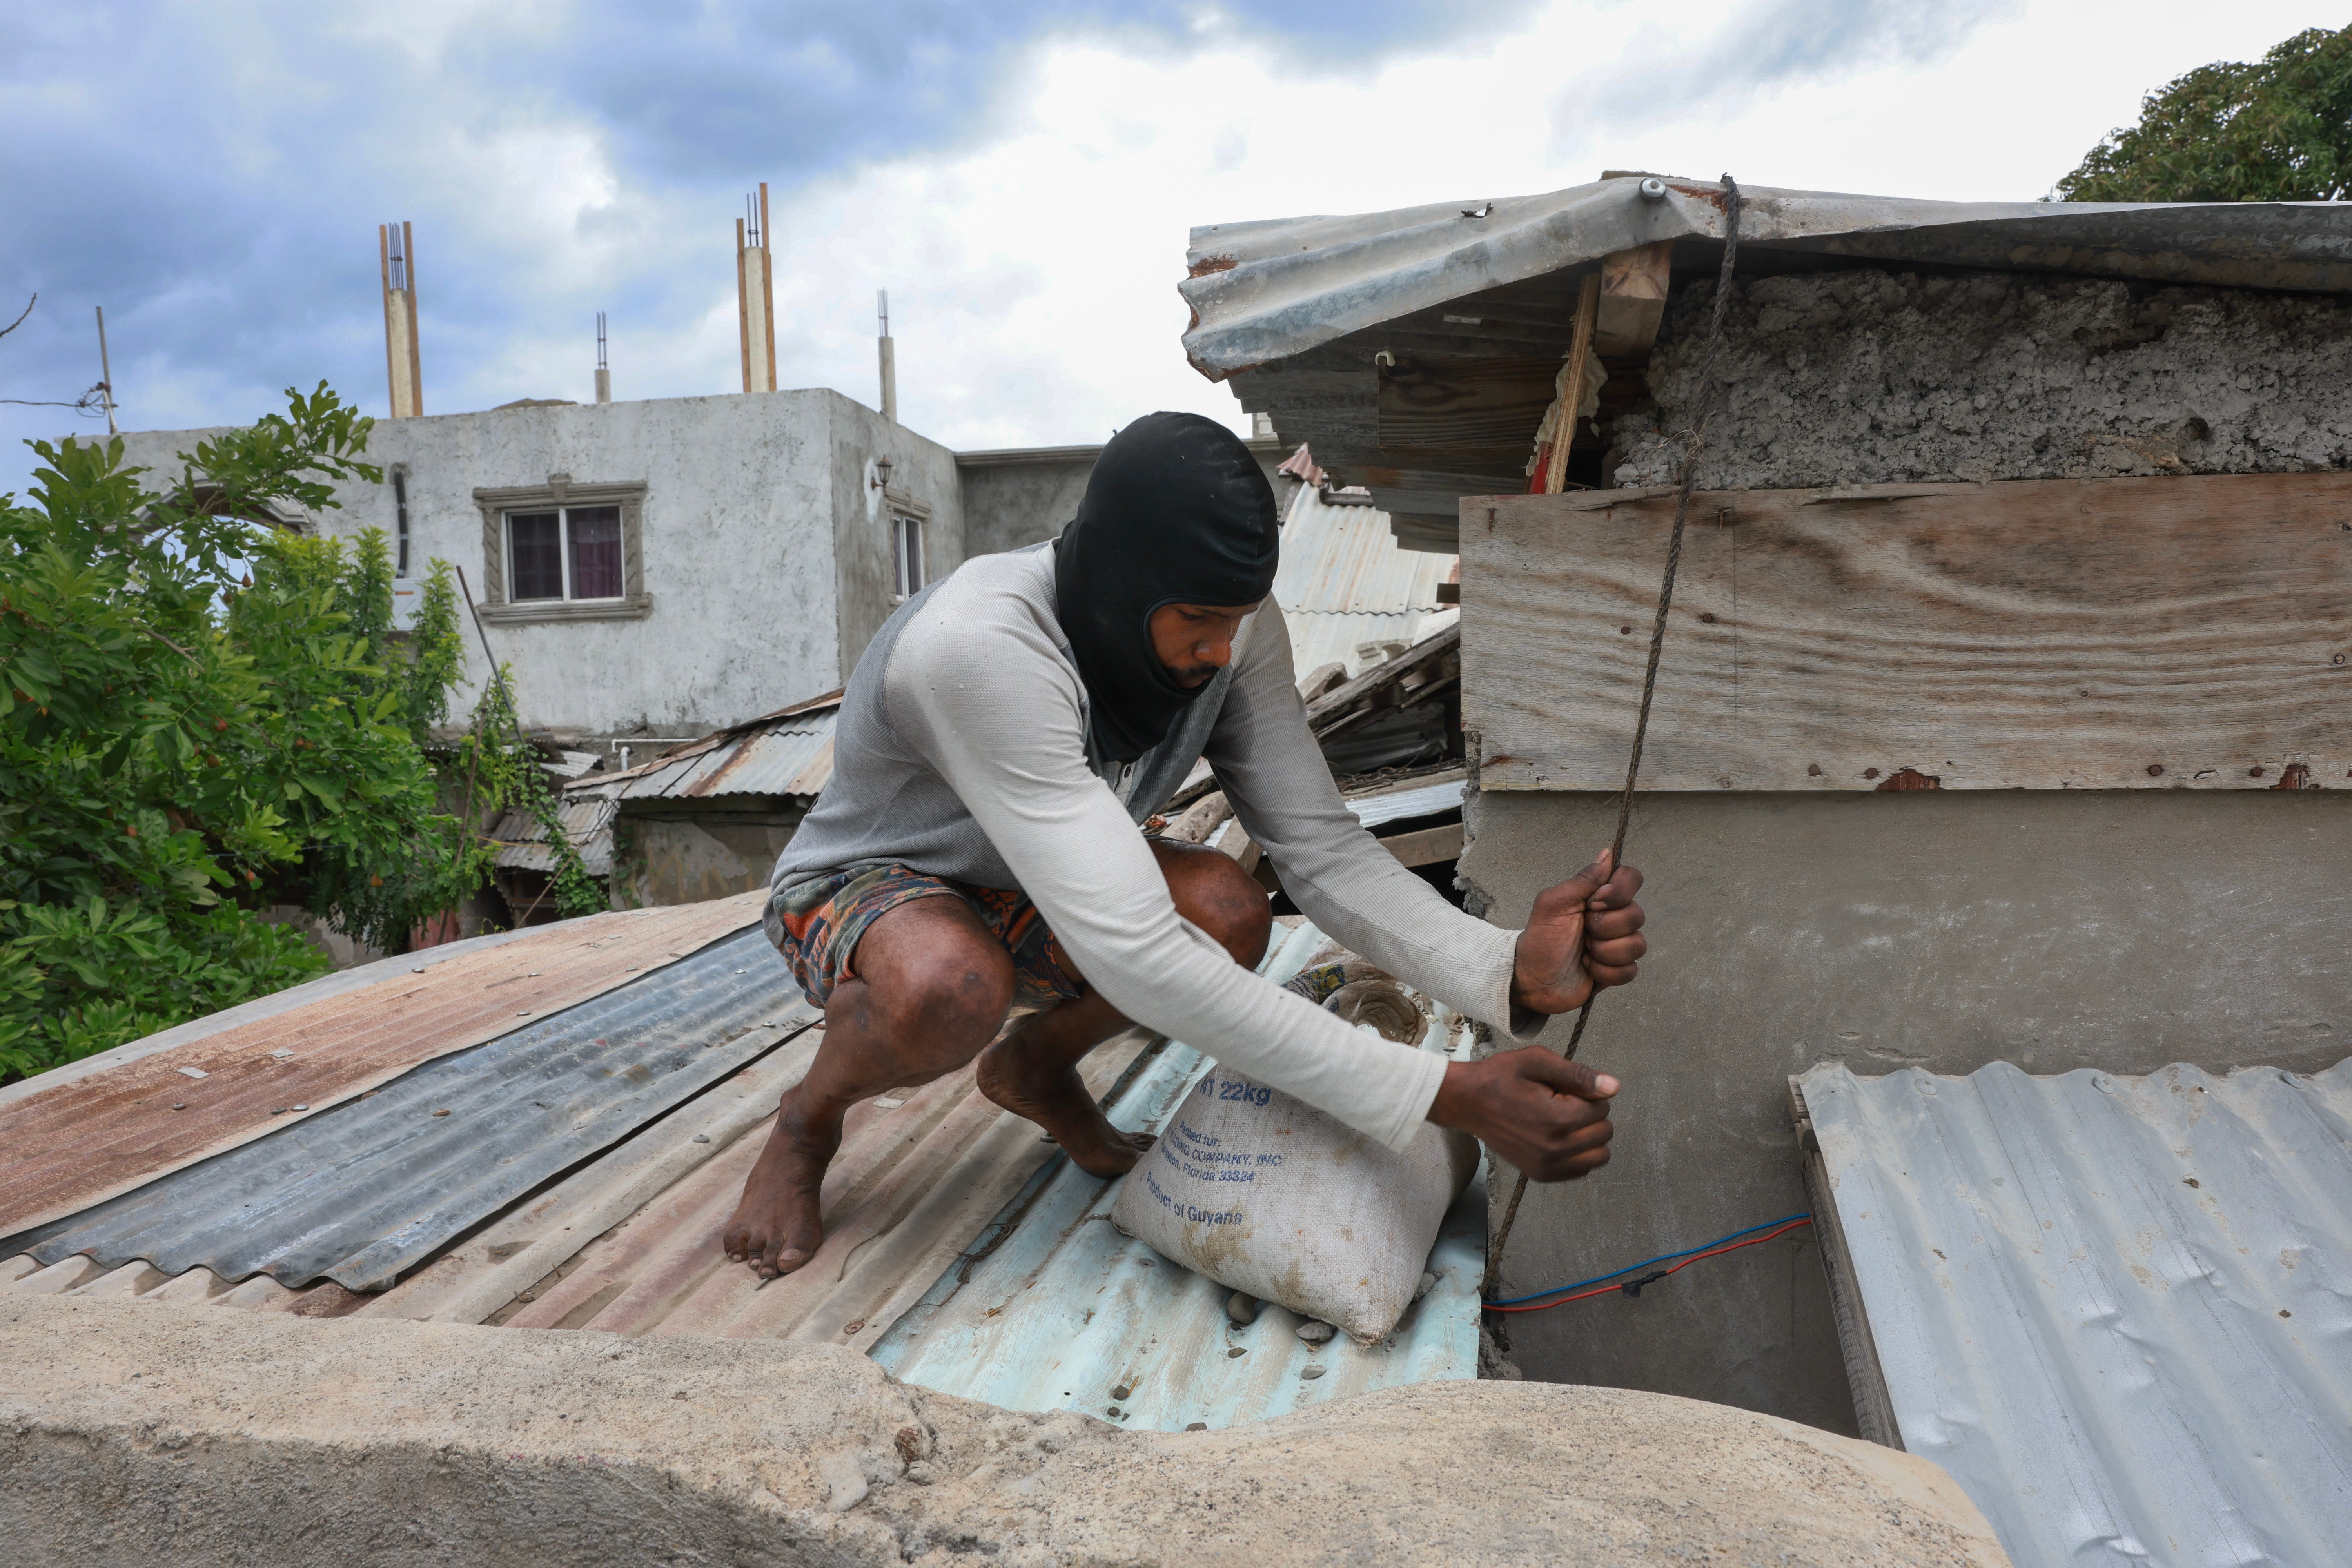 A person places sandbags on the roof of a house in Kingston, Jamaica, Wednesday as Hurricane Beryl approaches.